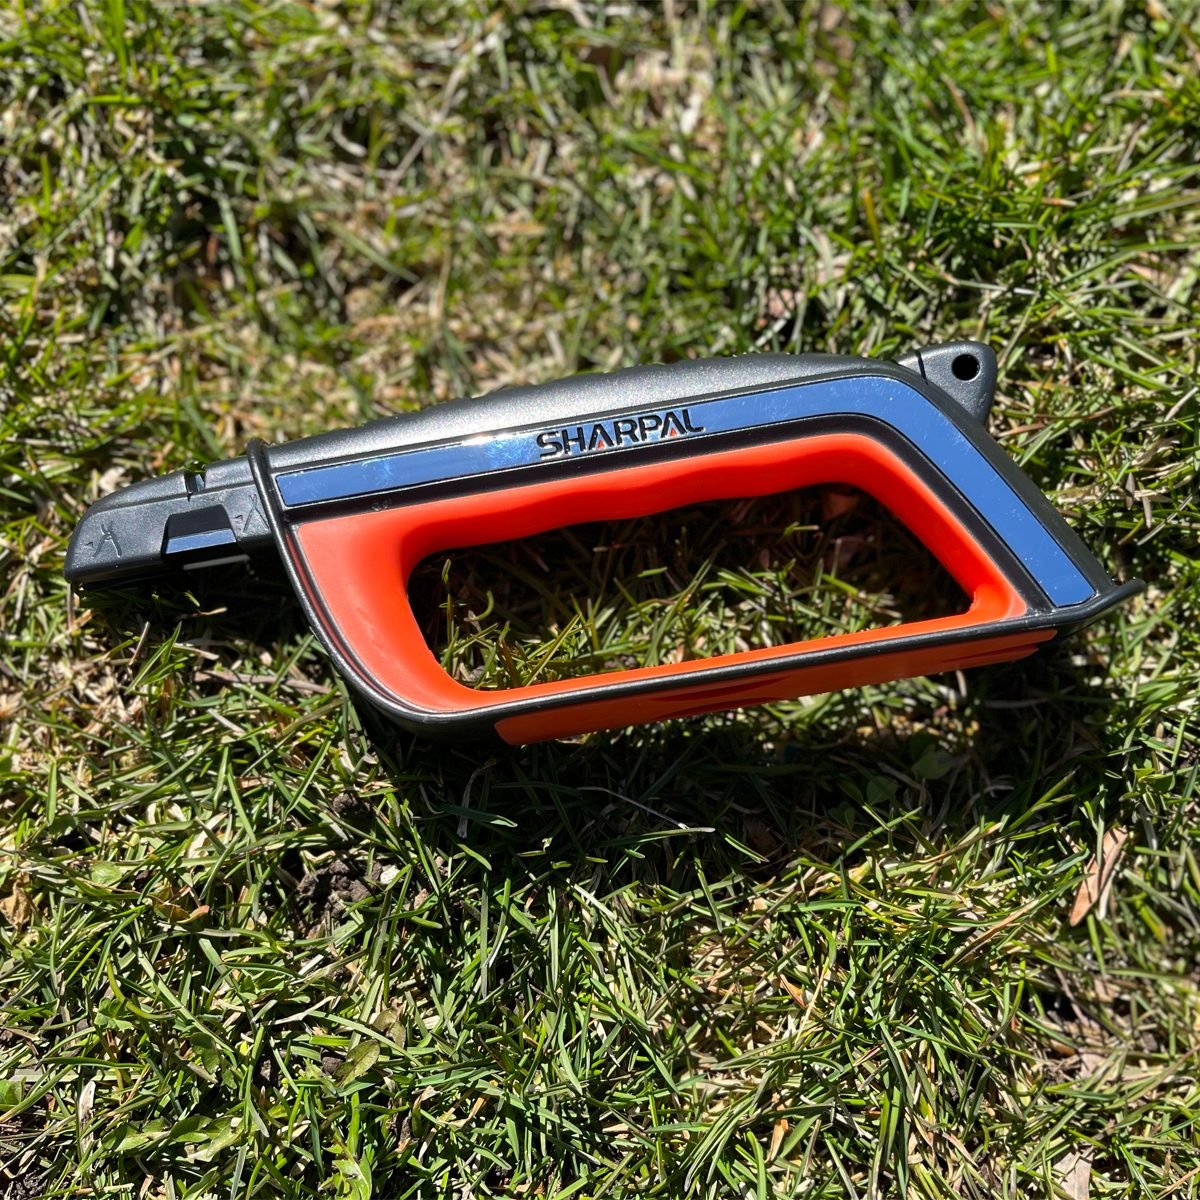 Edge out the Competition with the Sharpal Knife Sharpener for Lawn Mower Blades (and Much More)